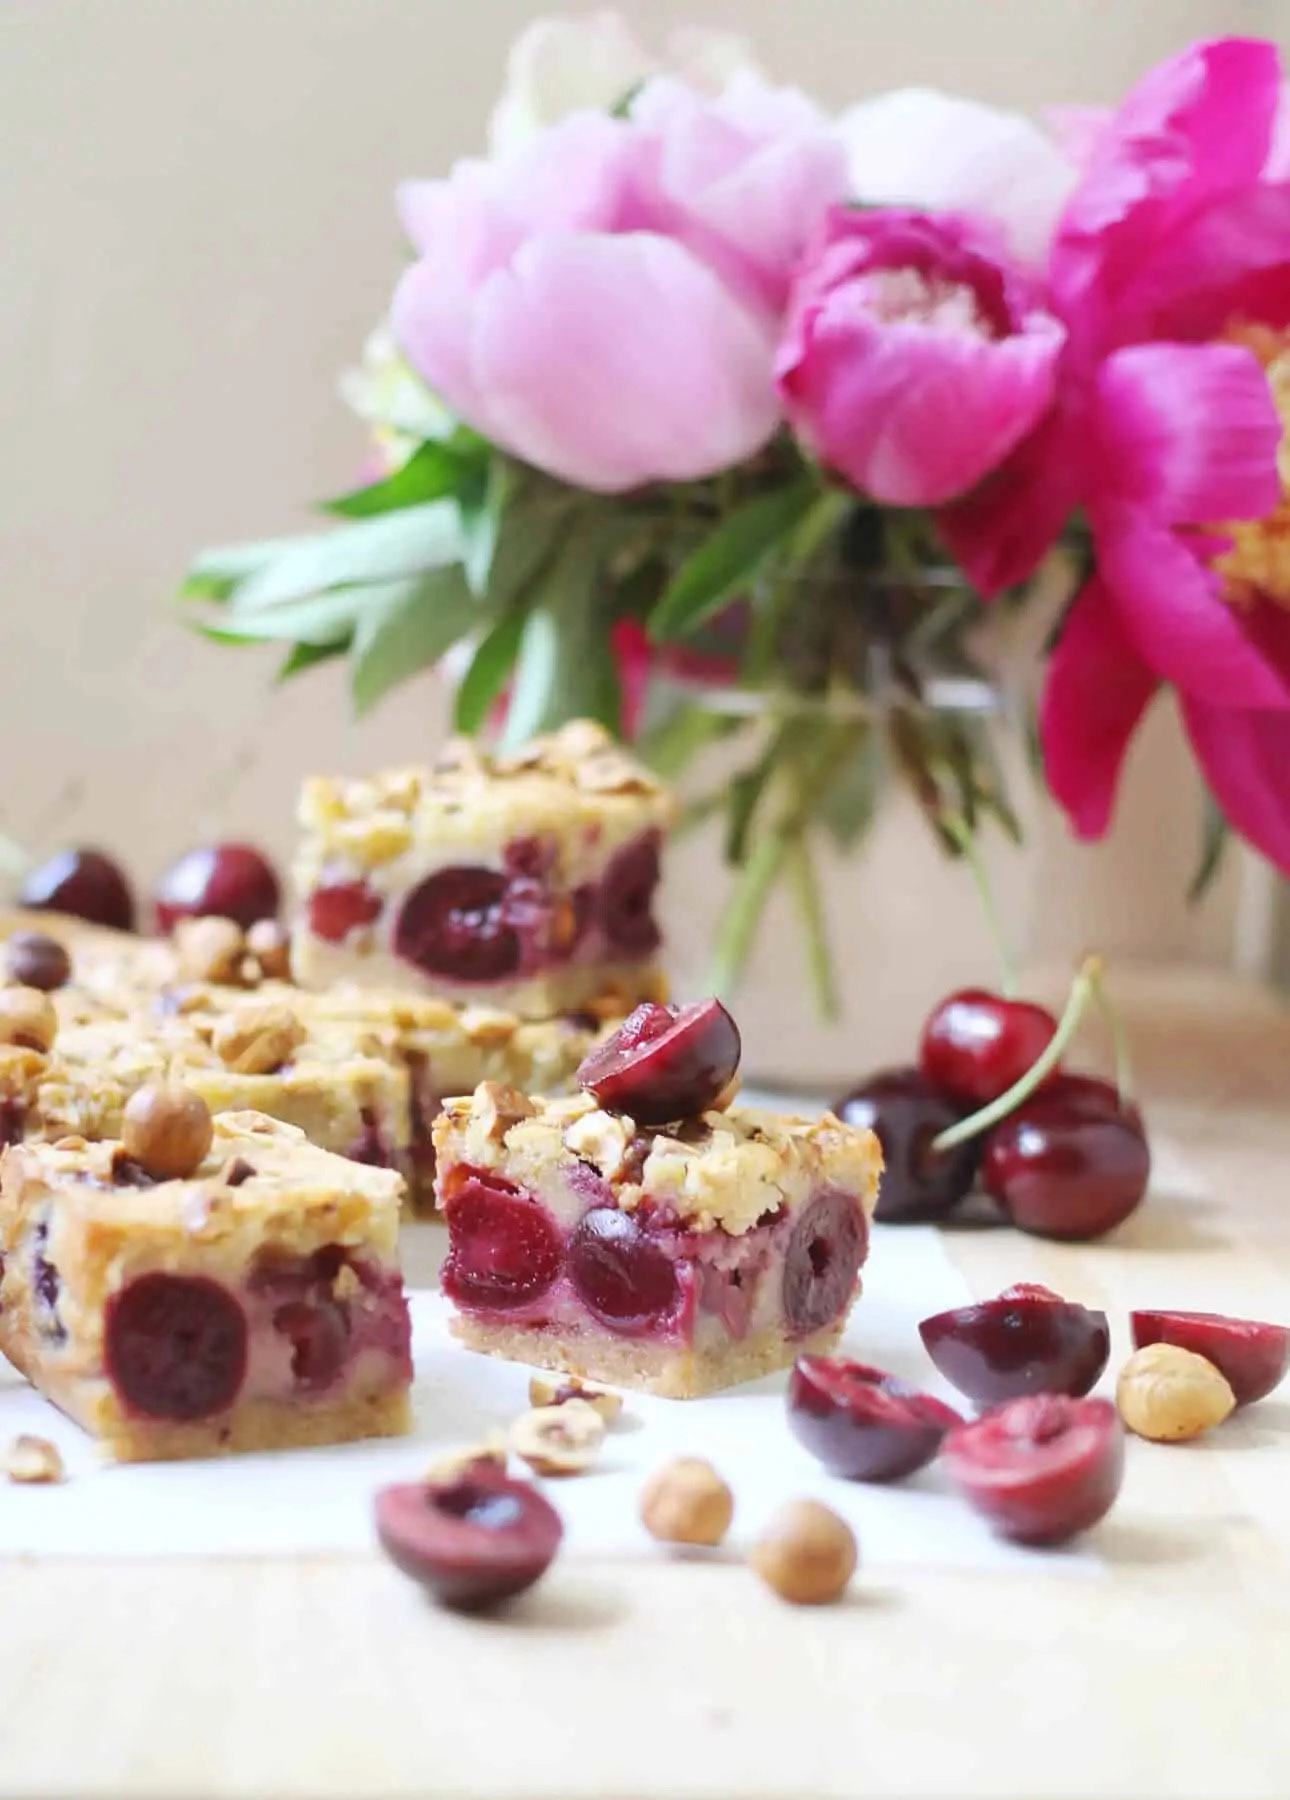 Brown Butter, Hazelnut and Cherry Clafoutis Bars by Food Nouveau